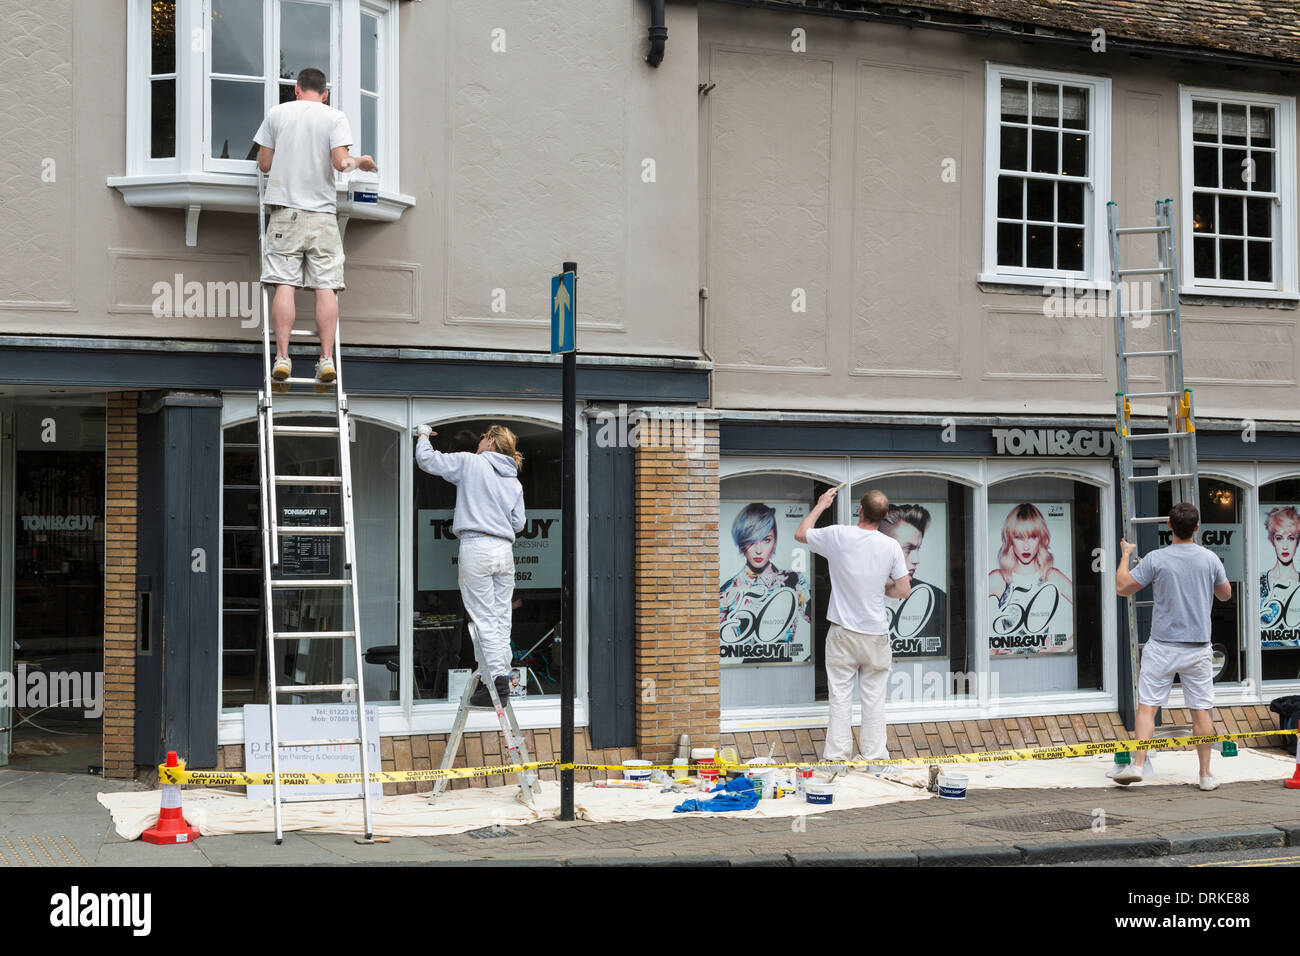 Team of painters, one on ladders, paint shop front, Cambridge, England Stock Photo